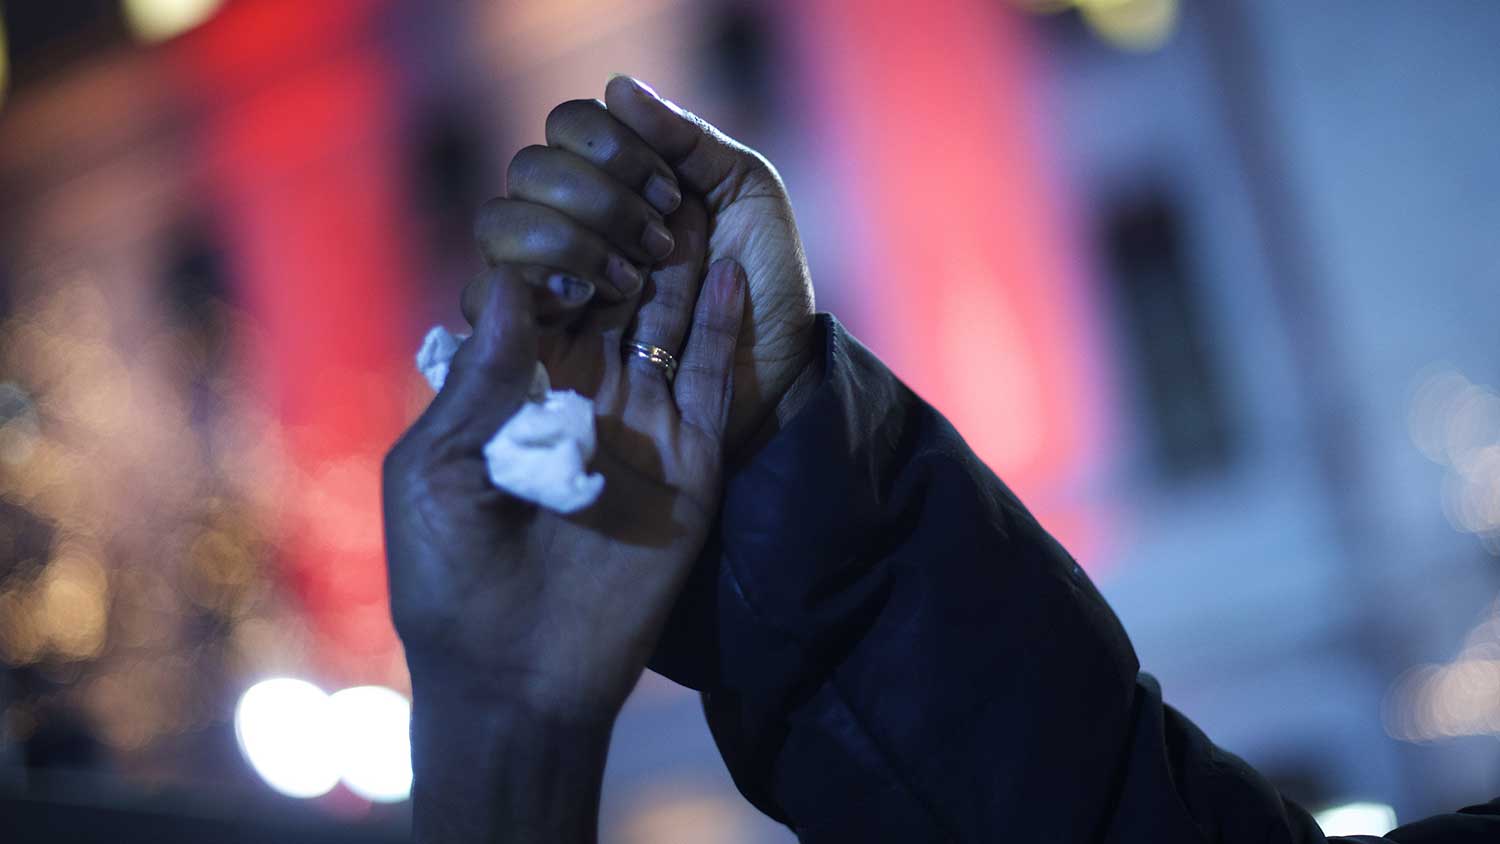 <p>Demonstrators clutch hands while gathering in Philadelphia to protest the grand jury decision during a Christmas Tree lighting ceremony at City Hall on Dec. 3, 2014.</p>
